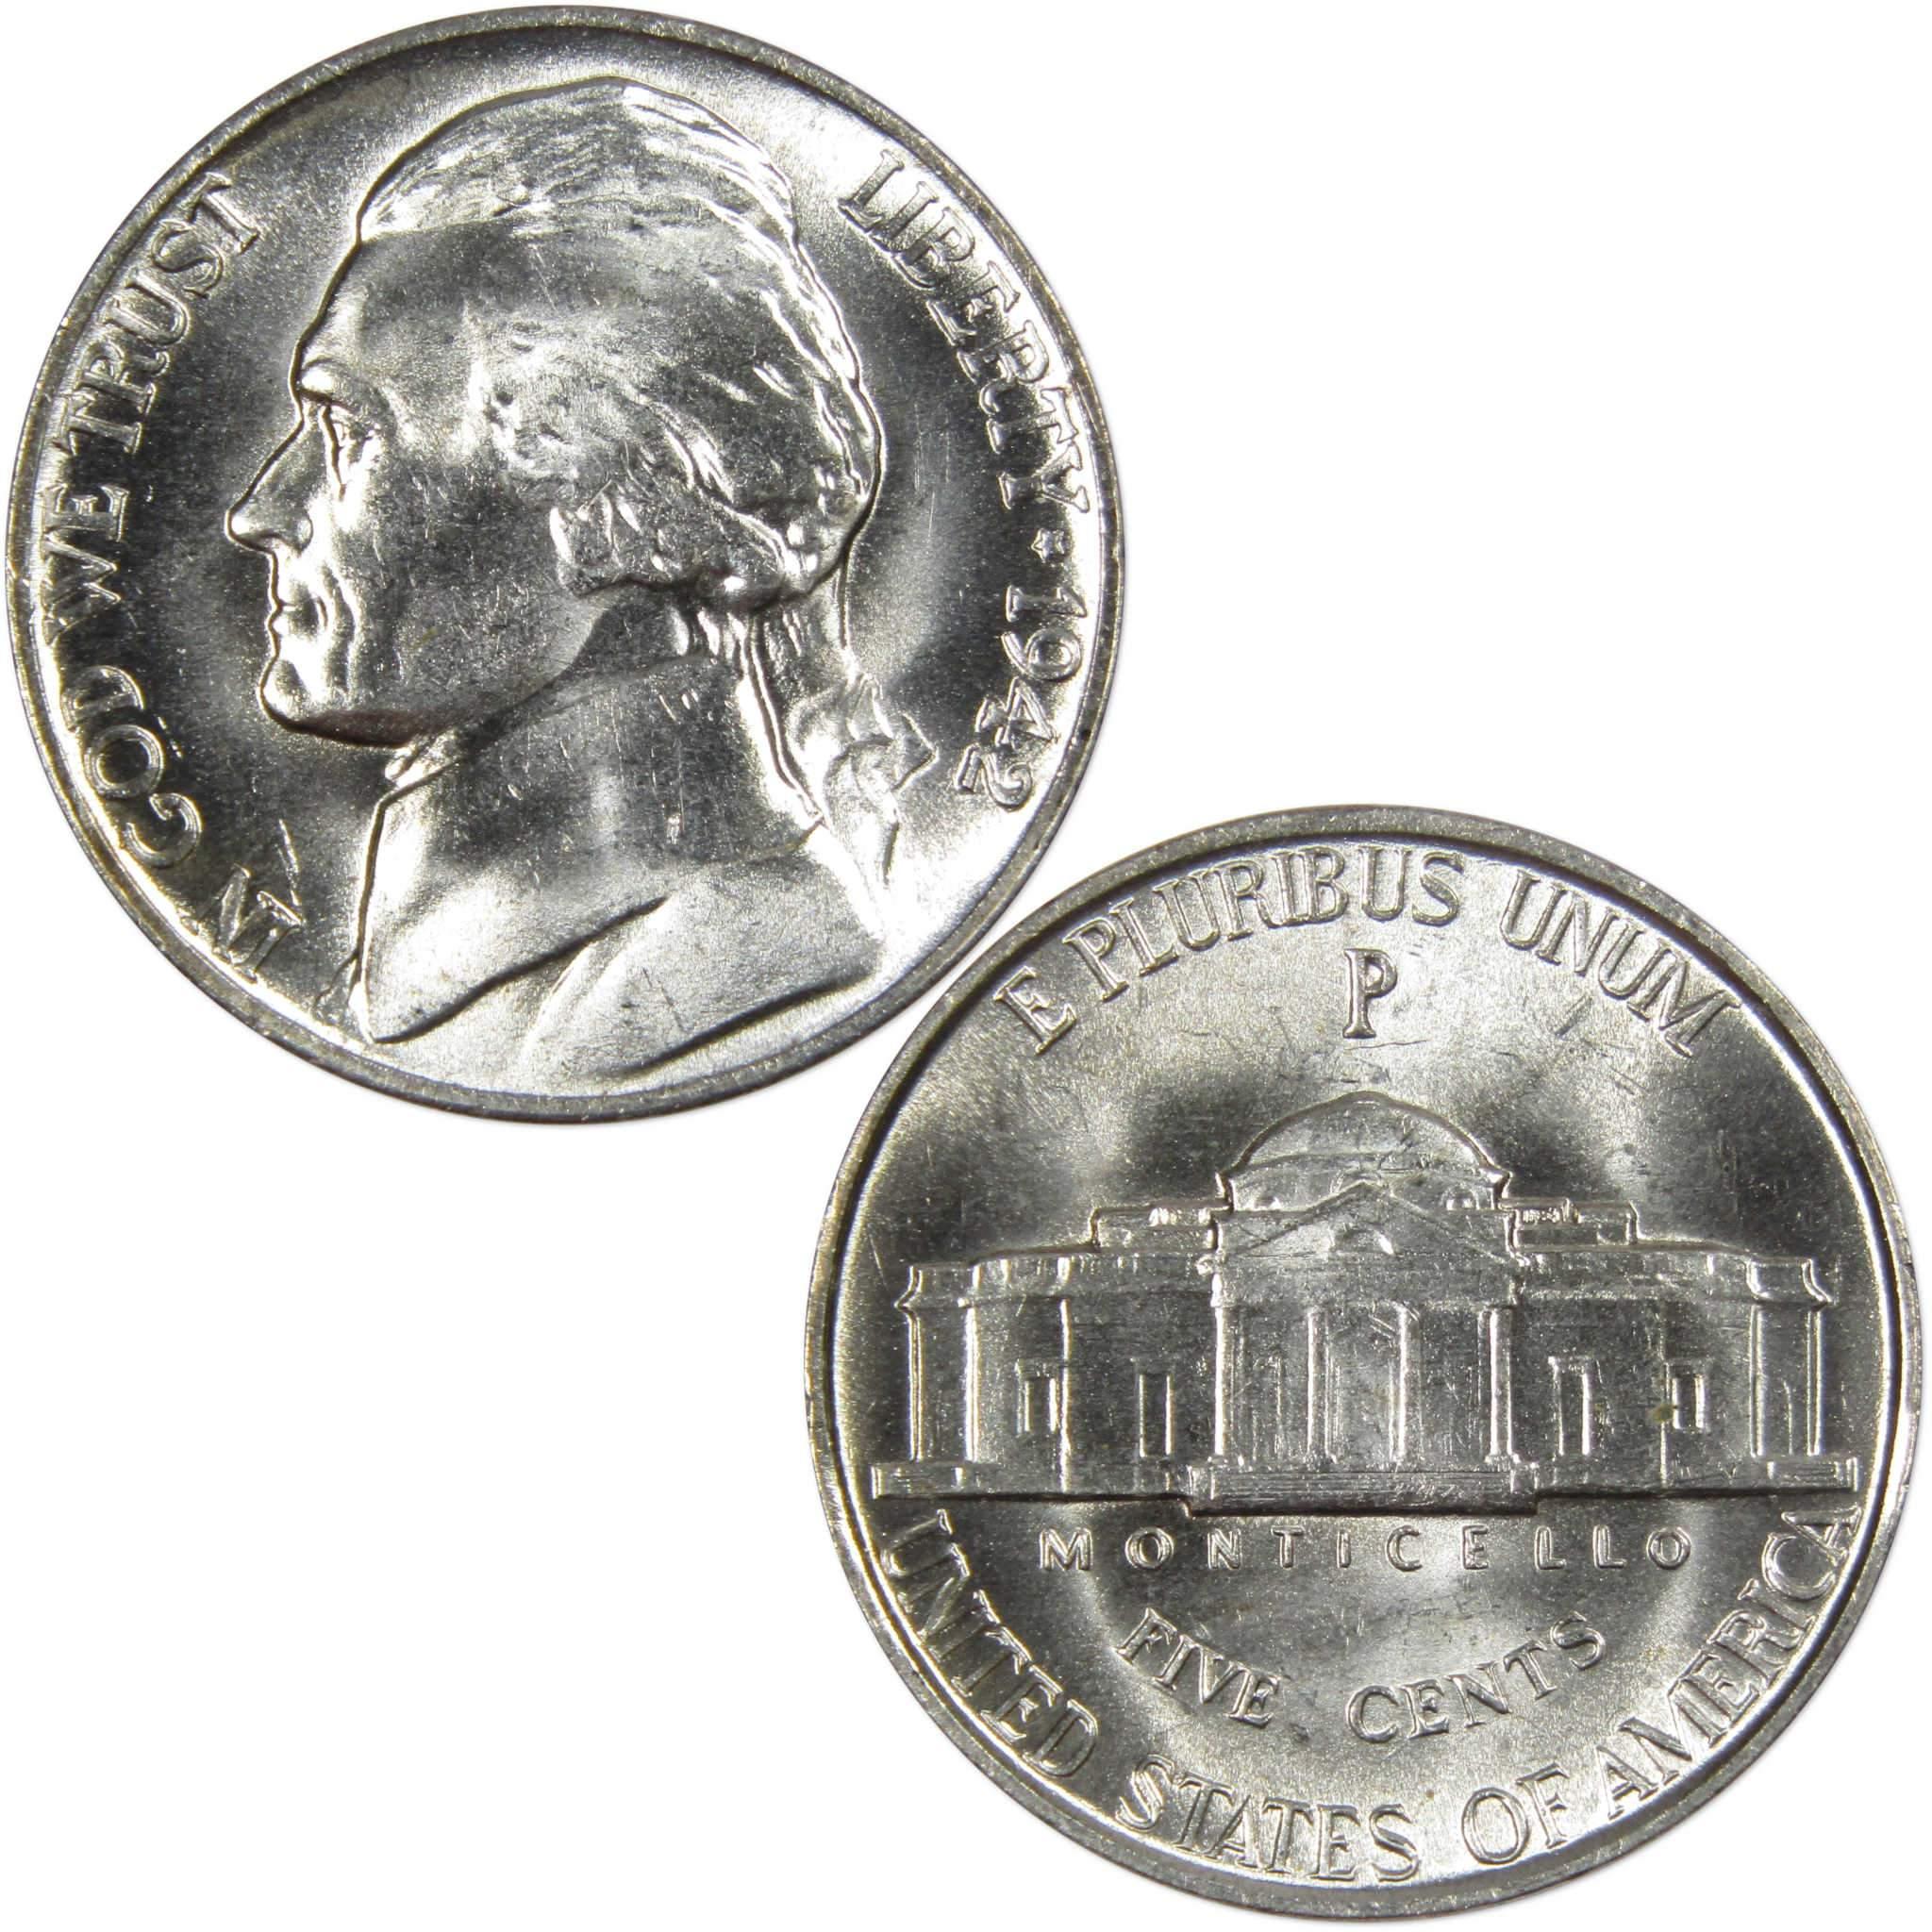 Jefferson Wartime Nickel 3 Coin PDS All-Mint Set BU Uncirculated 35% Silver 5c